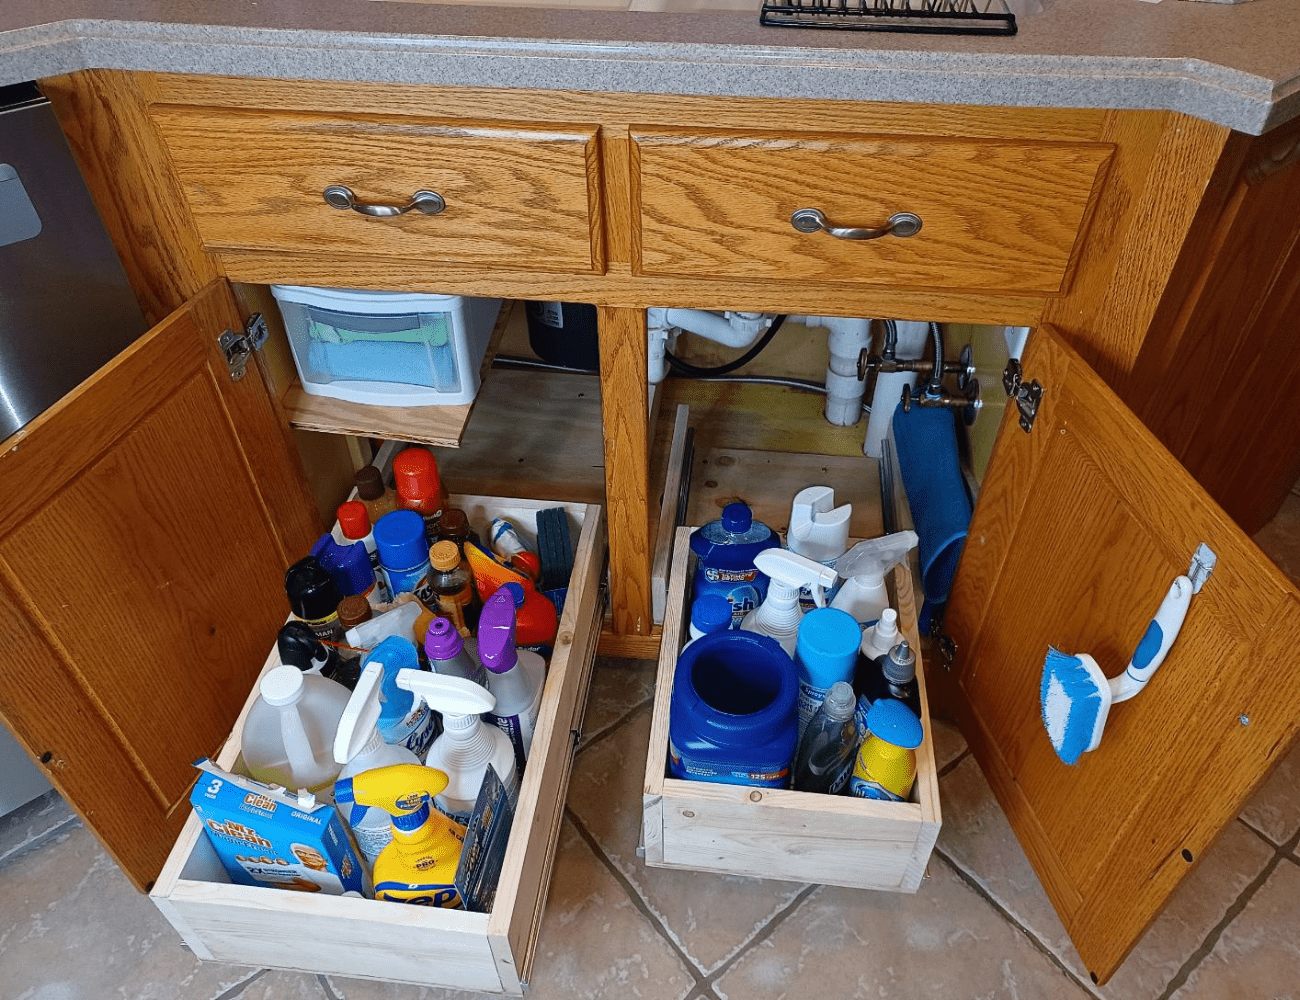 How To Build Under Sink Storage Trays - The Daily DIY